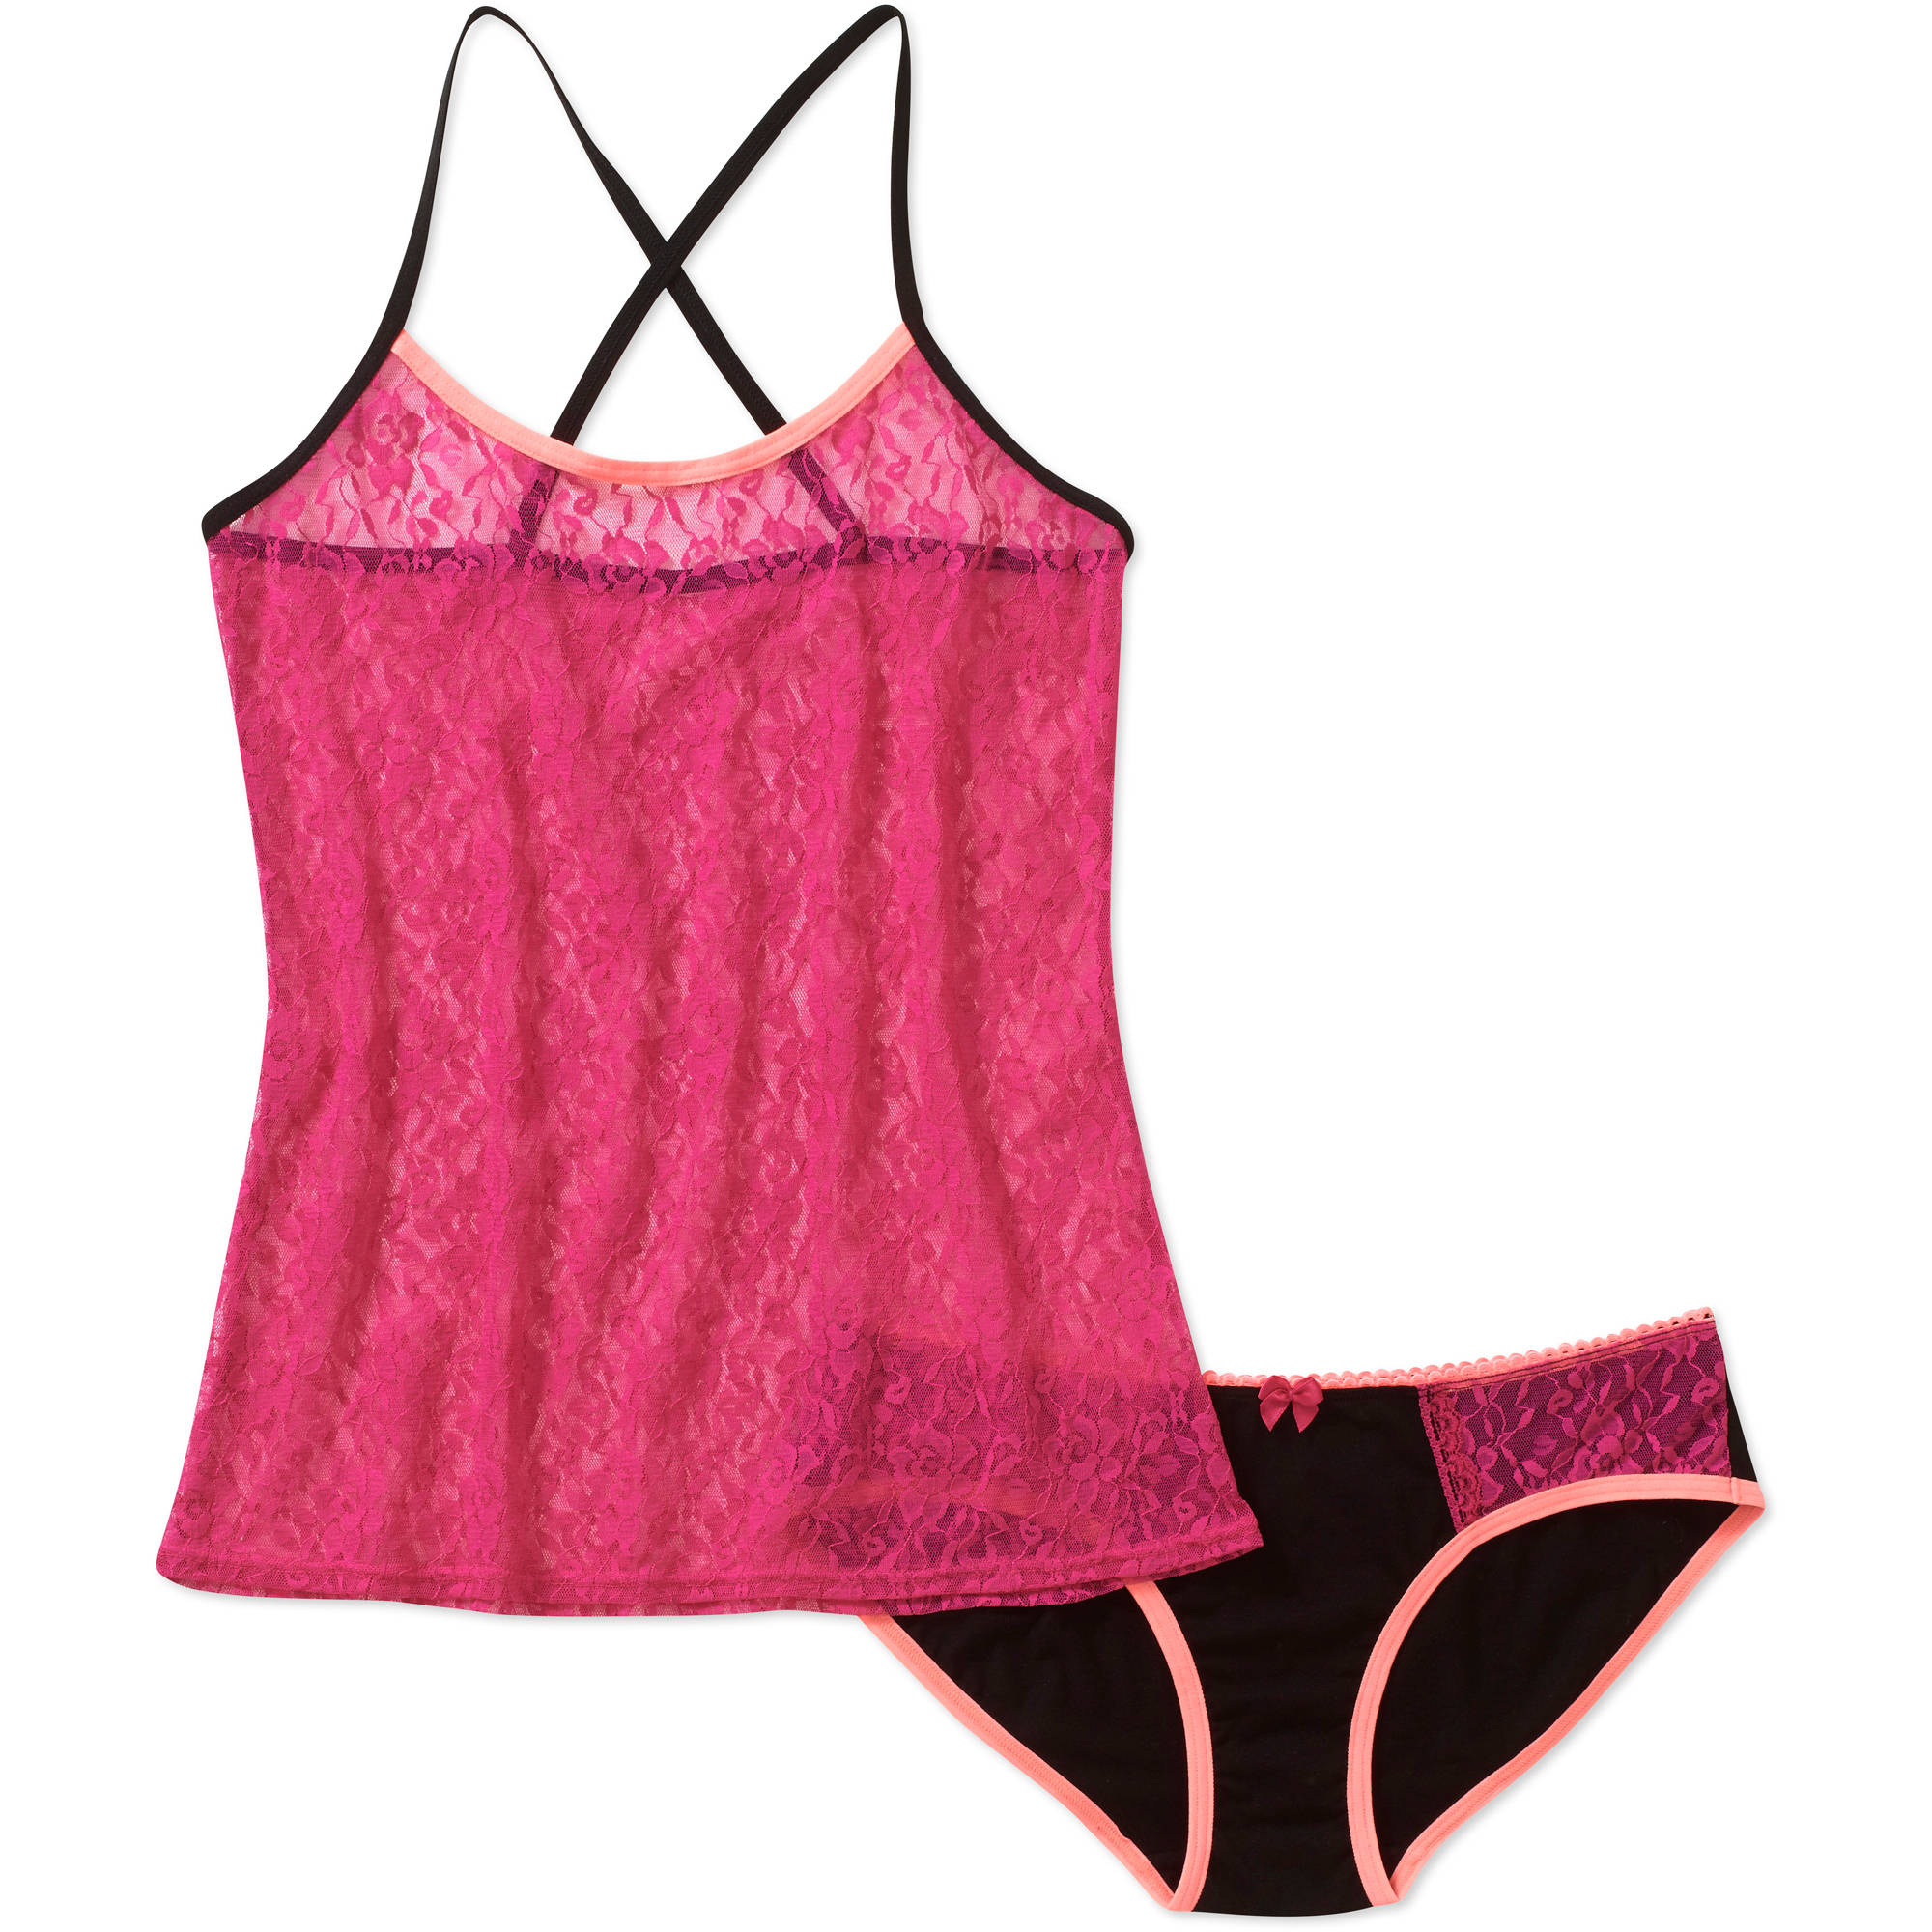 Juniors Lace Cami and Panty Set - image 1 of 1